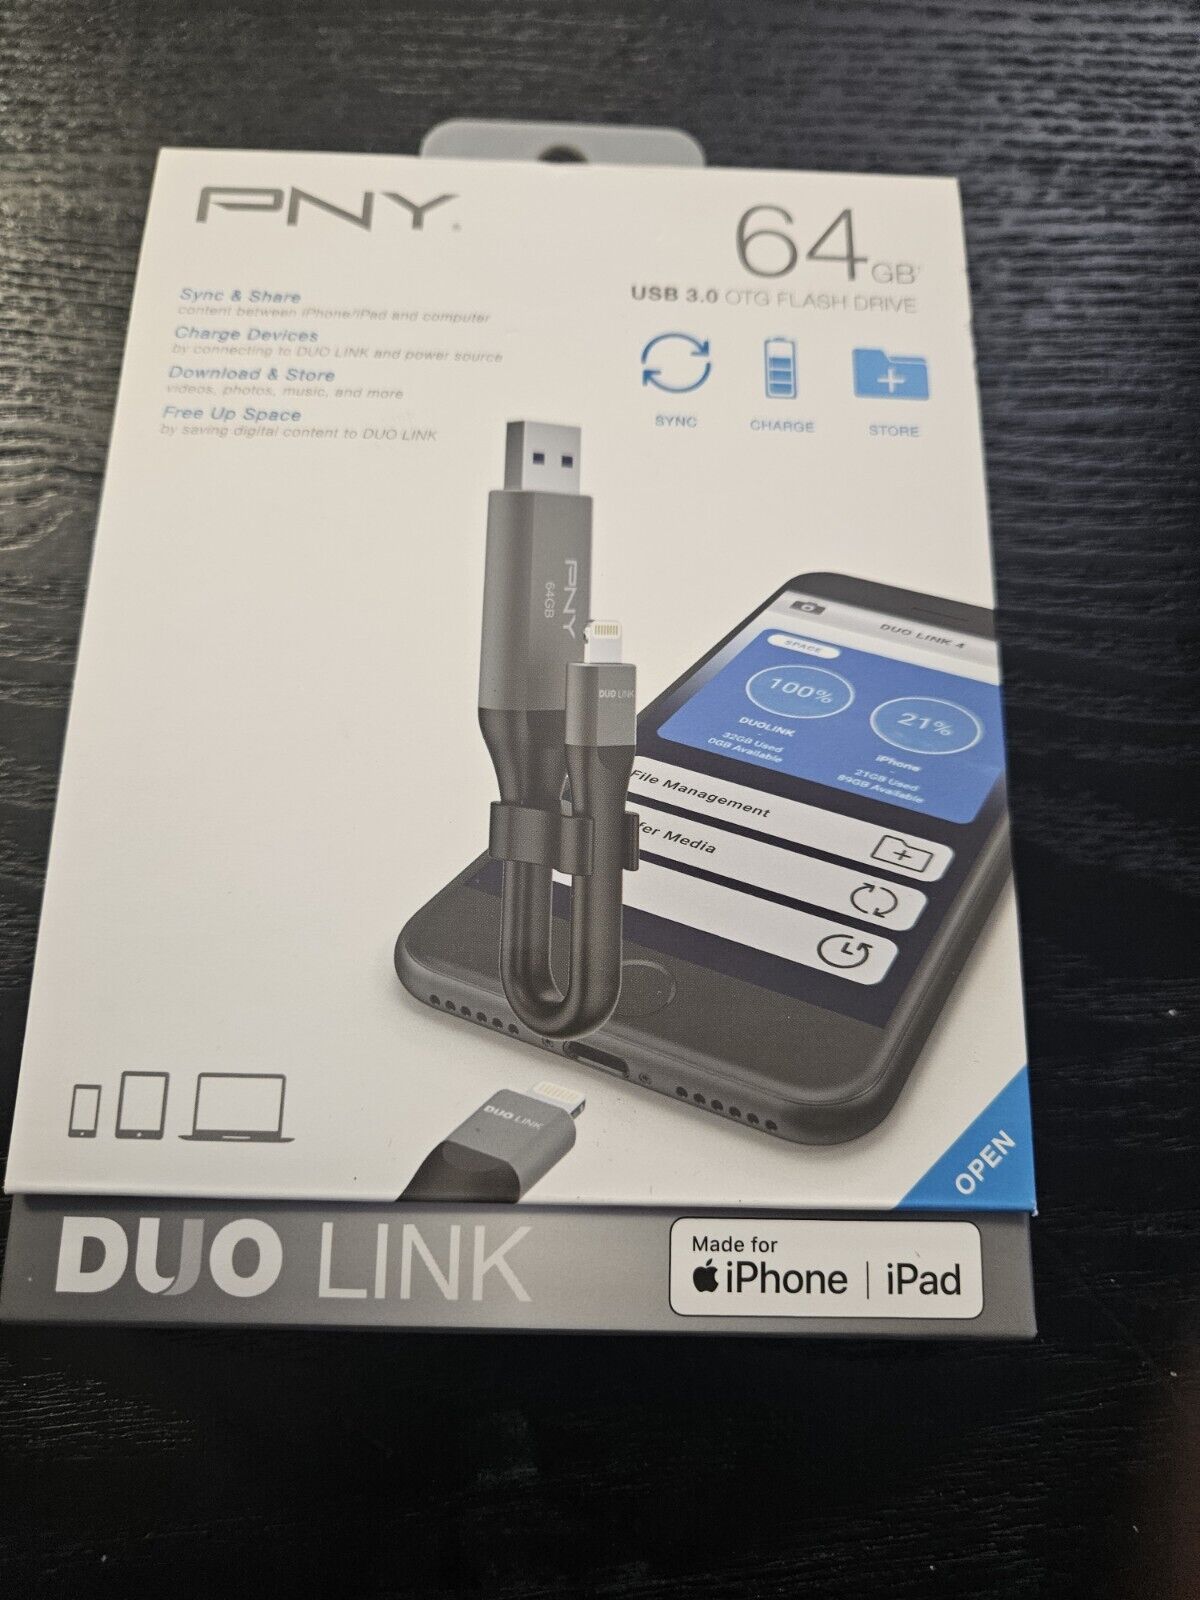 PNY - DUO Link 64GB USB 3.0 OTG Flash Drive for iOS Devices and Computers - Gray